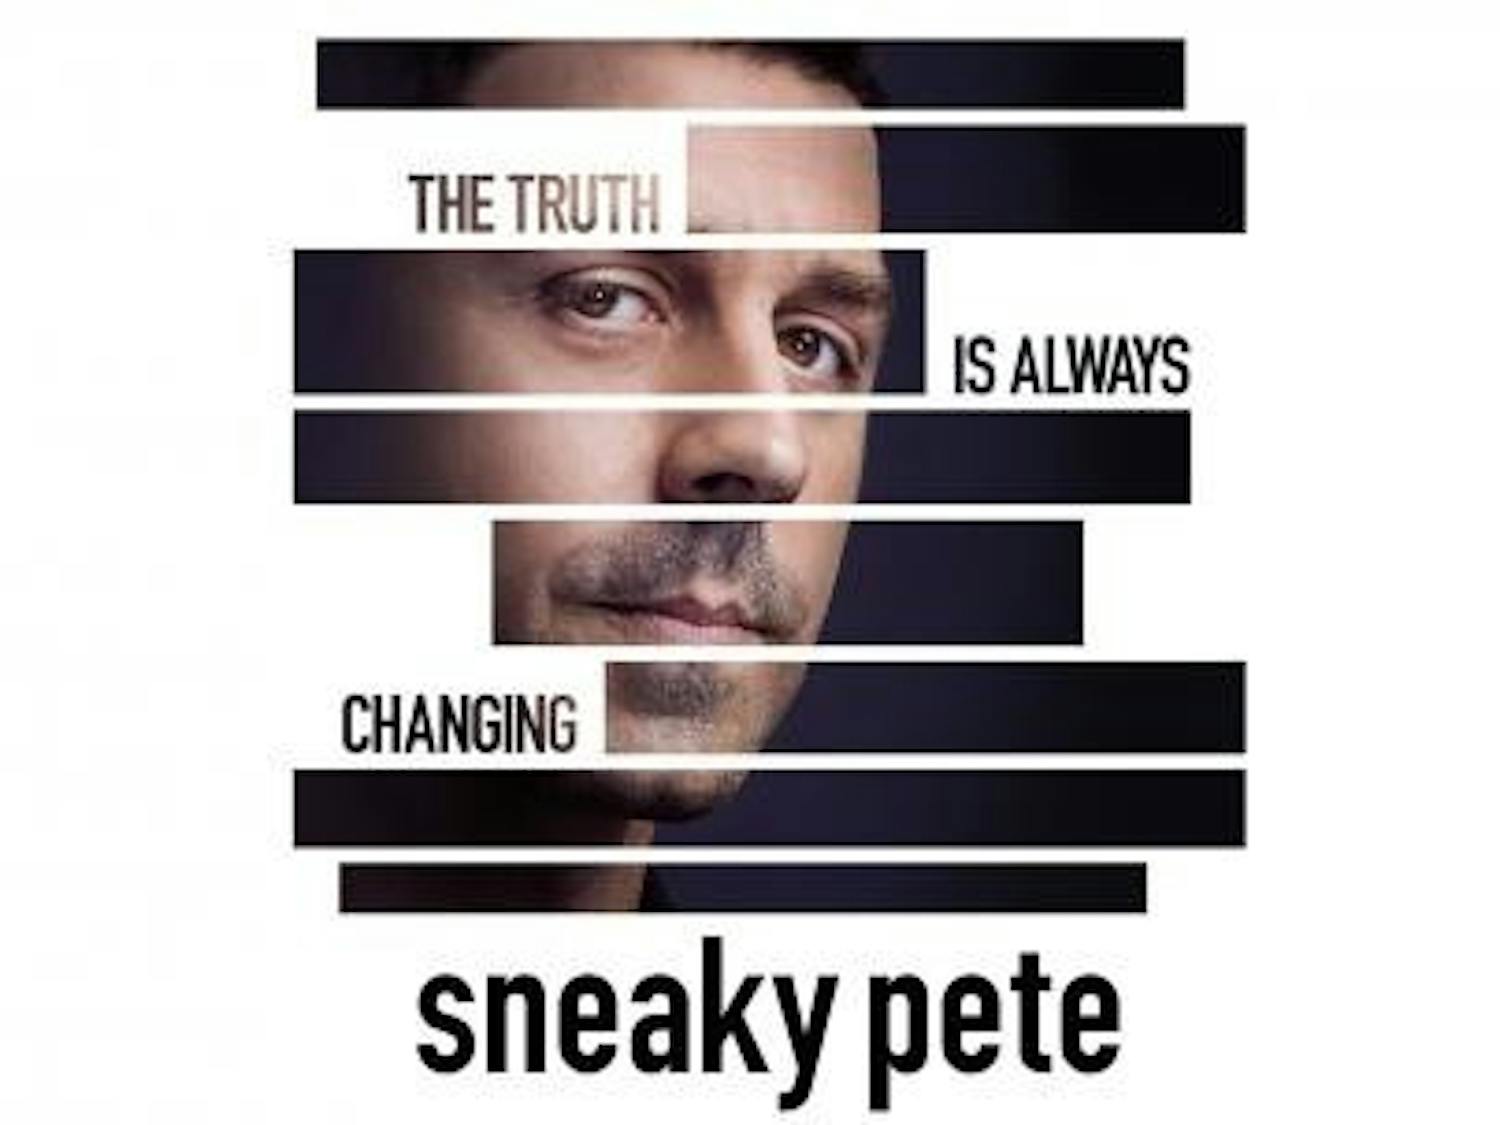 "Sneaky Pete" brings a breathtaking narrative to Amazon Prime's lineup.